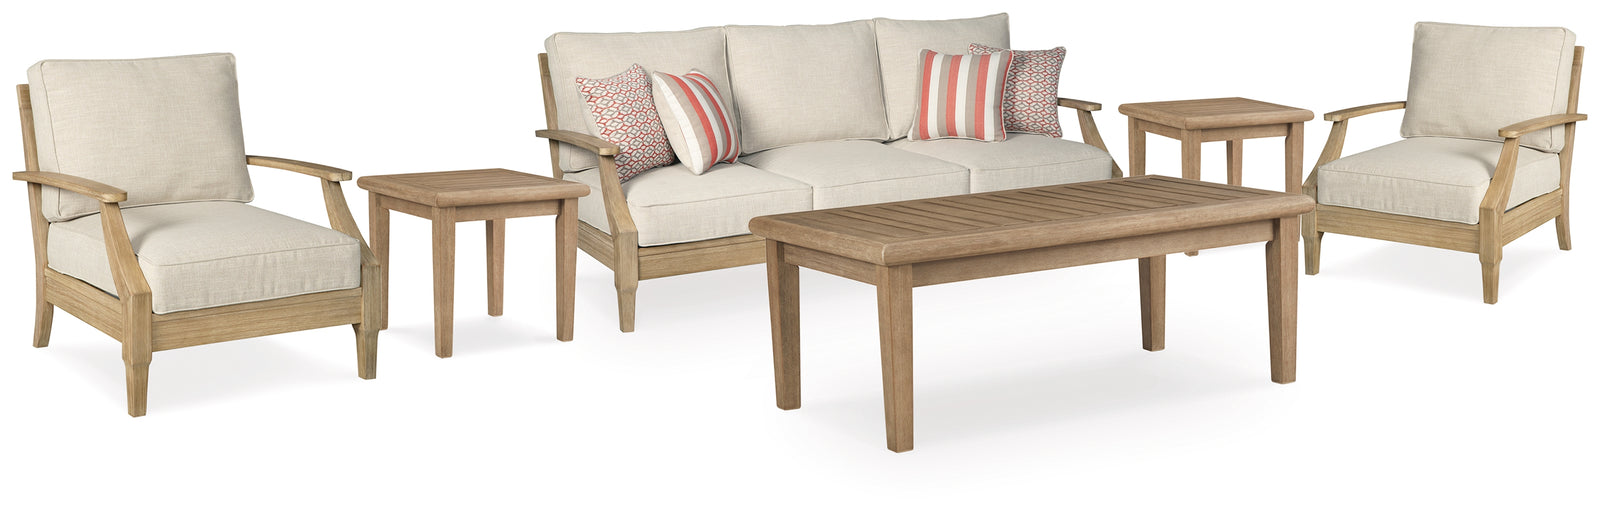 Clare Beige View Outdoor Sofa And  2 Lounge Chairs With Coffee Table And 2 End Tables